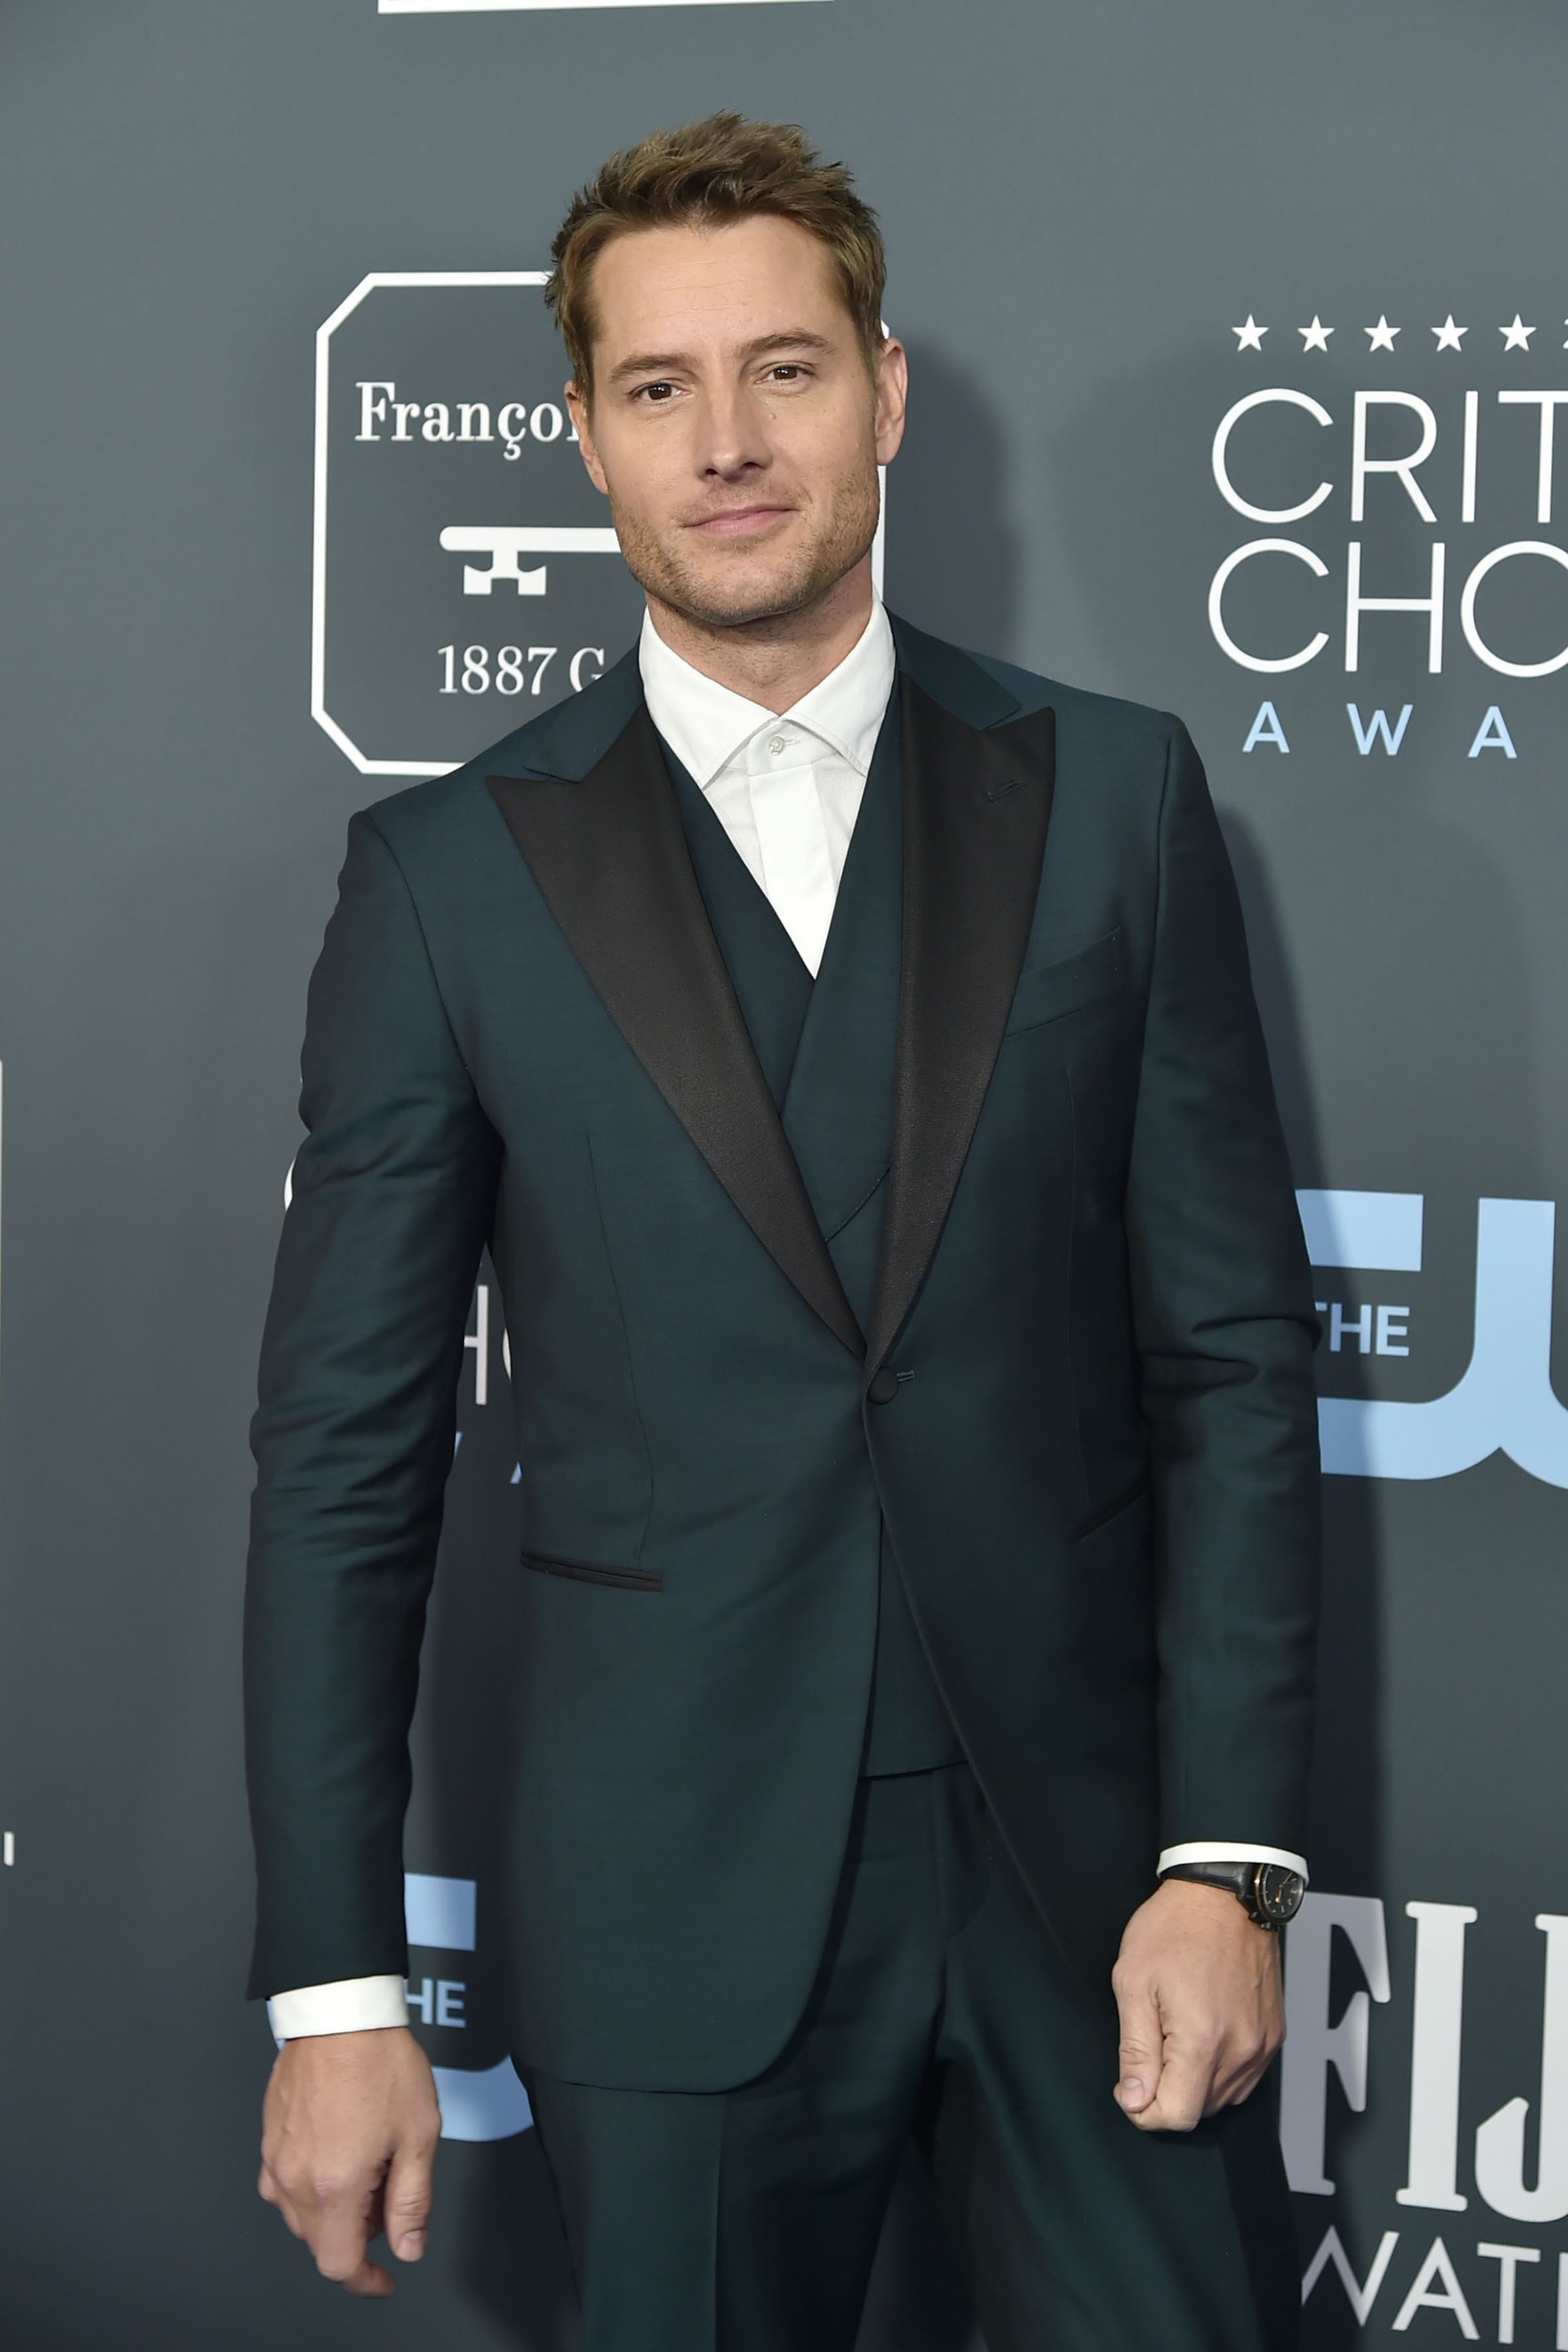 Justin Hartley during the arrivals for the 25th Annual Critics' Choice Awards at Barker Hangar on January 12, 2020 in Santa Monica, CA. | Photo: Getty Images